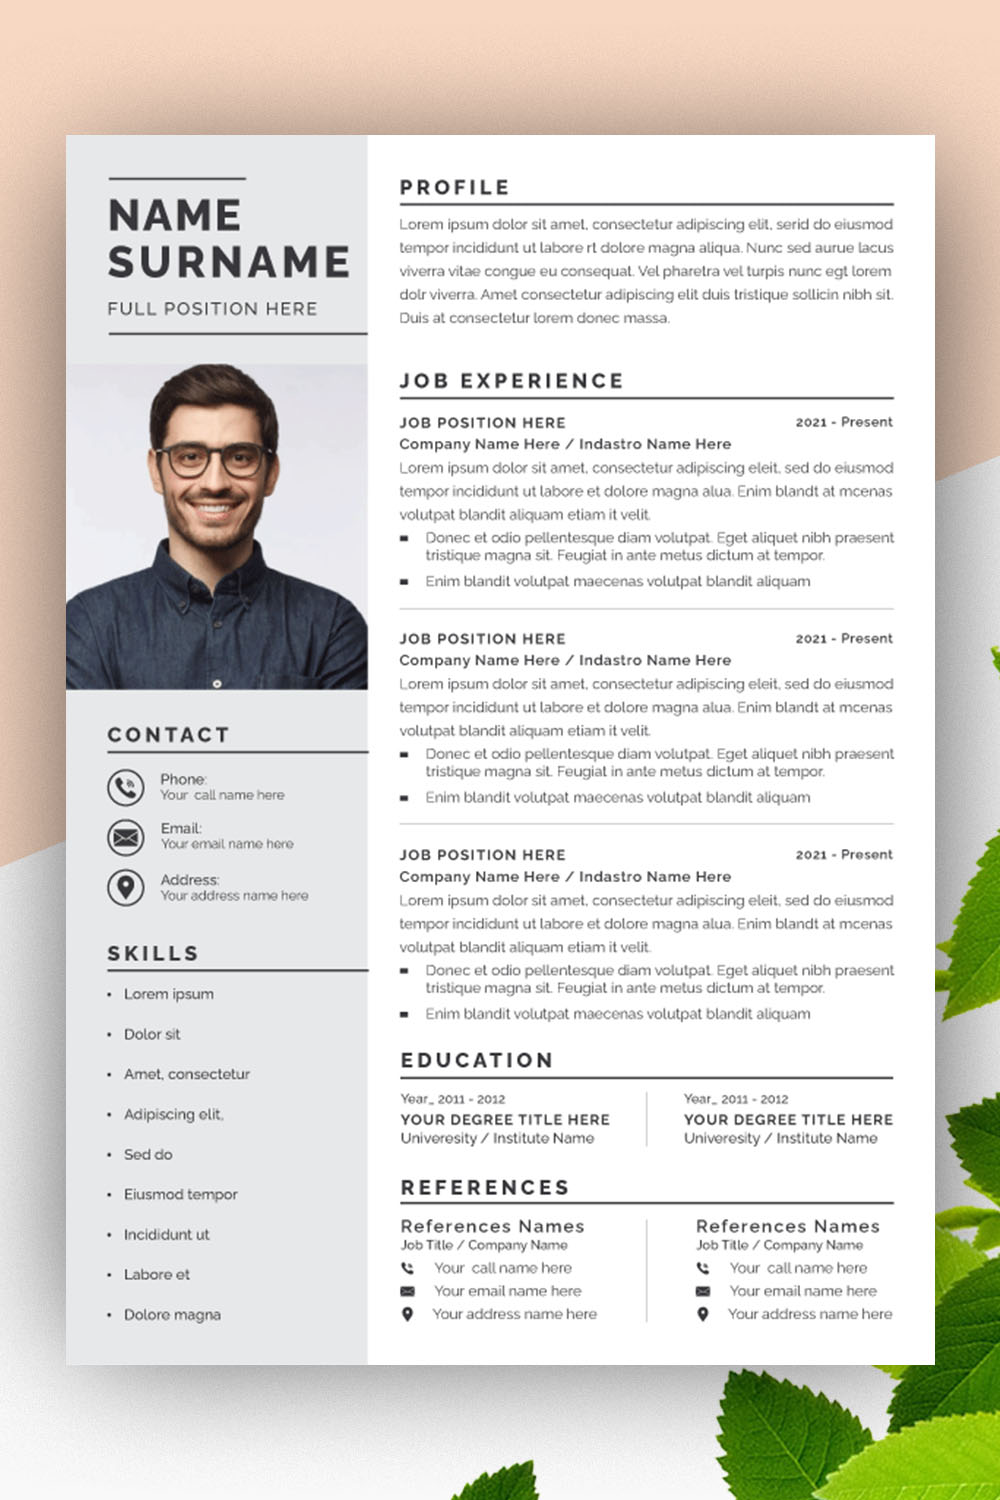 Resume Design Template with Cover Letter Clean Cv Layout pinterest preview image.